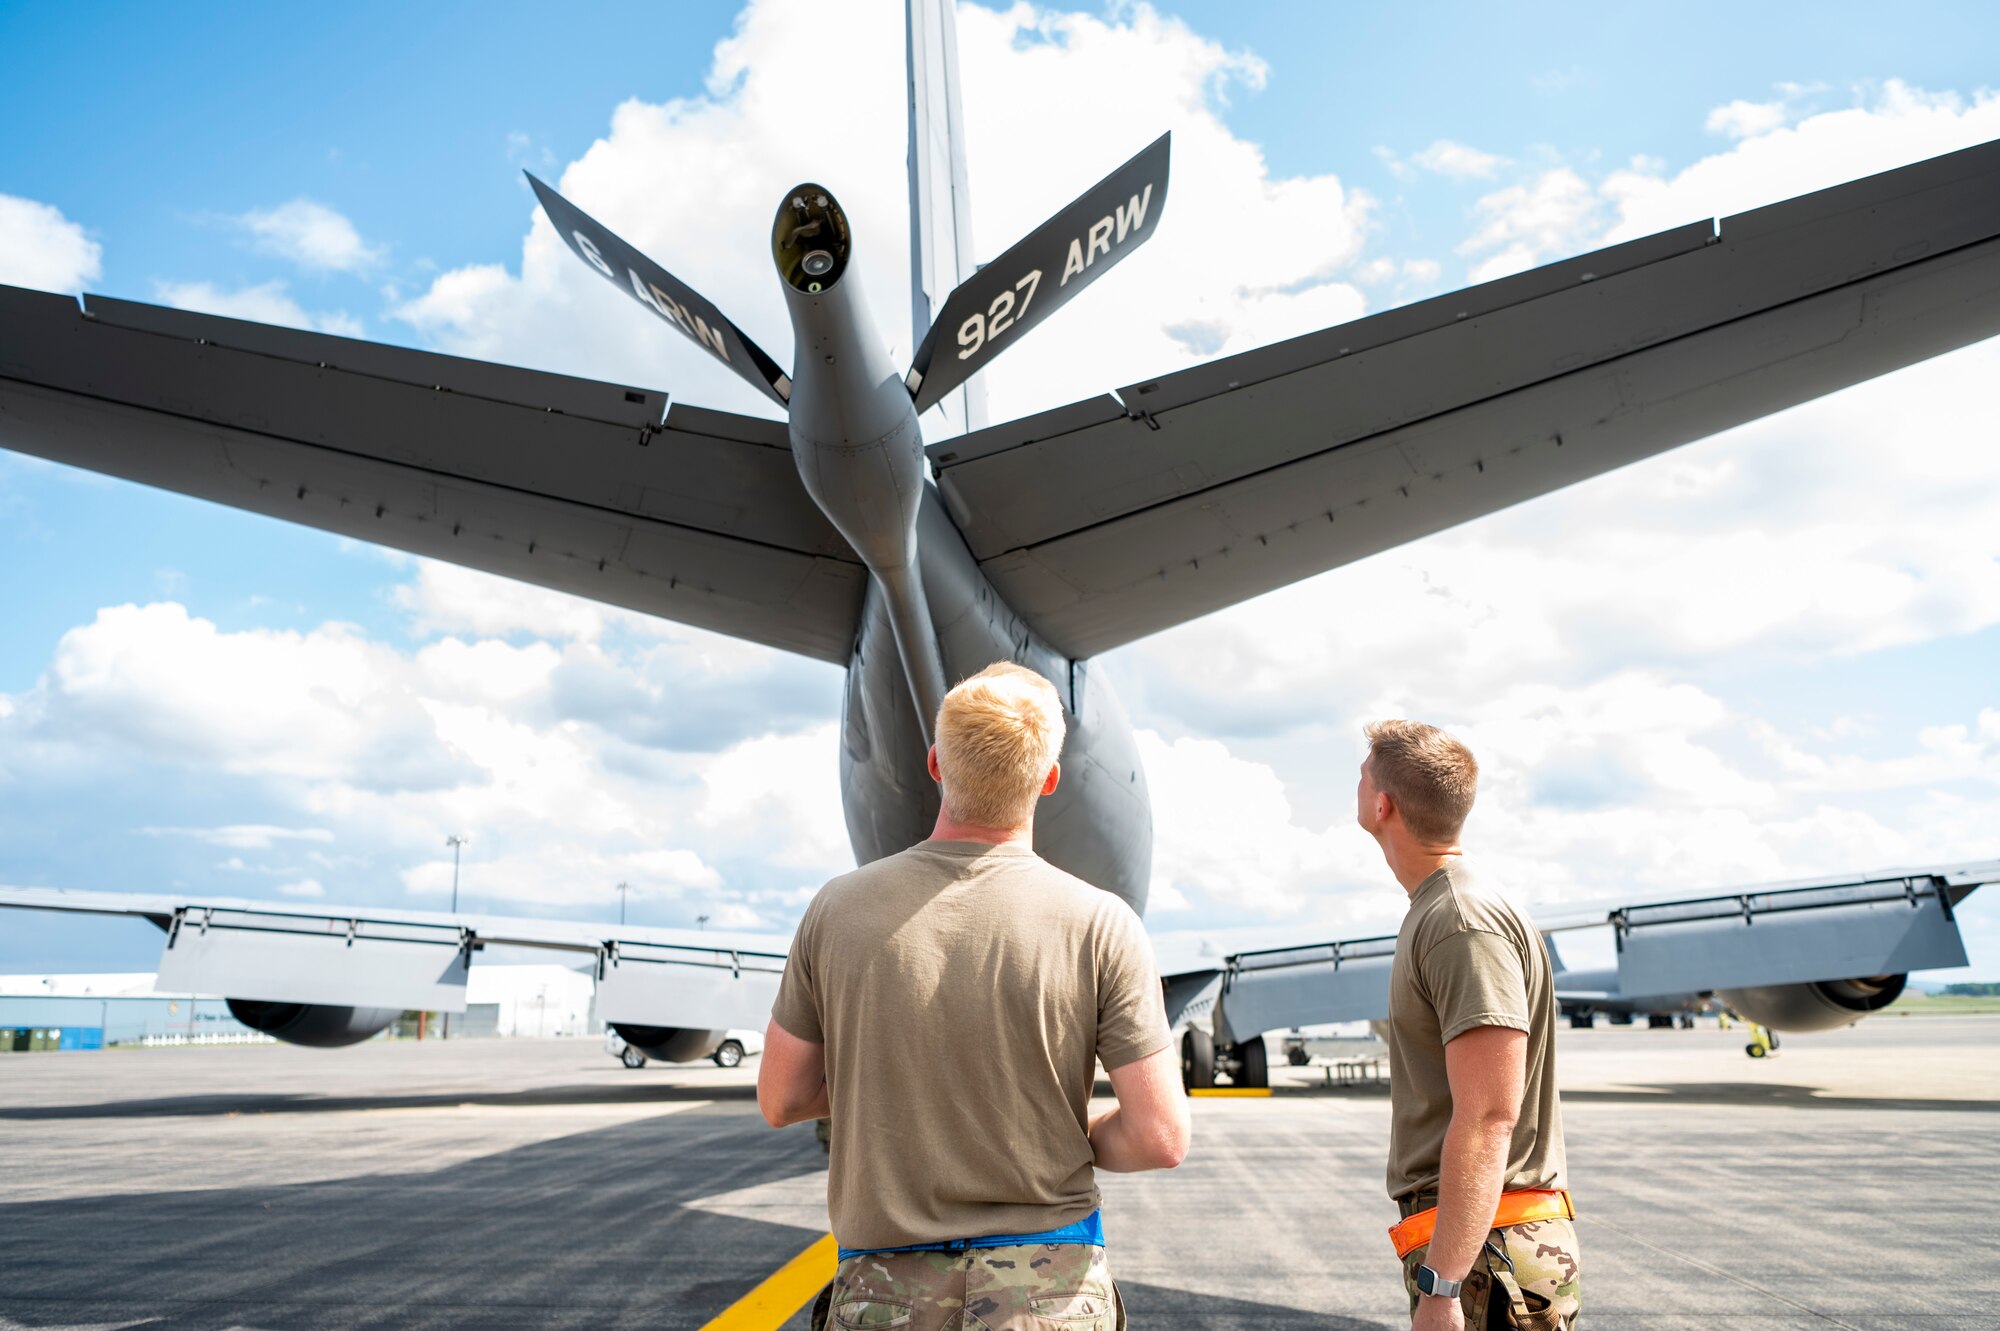 U.S. Air Force Senior Airman Jacob Tobolski and Staff Sgt. Nicholas Zeagler, maintainers with the 6th Aircraft Maintenance Squadron inspect a KC-135 Stratotanker assigned to the 91st Air Refueling Squadron at Bangor Air National Guard Base, Maine, Aug. 25, 2022.